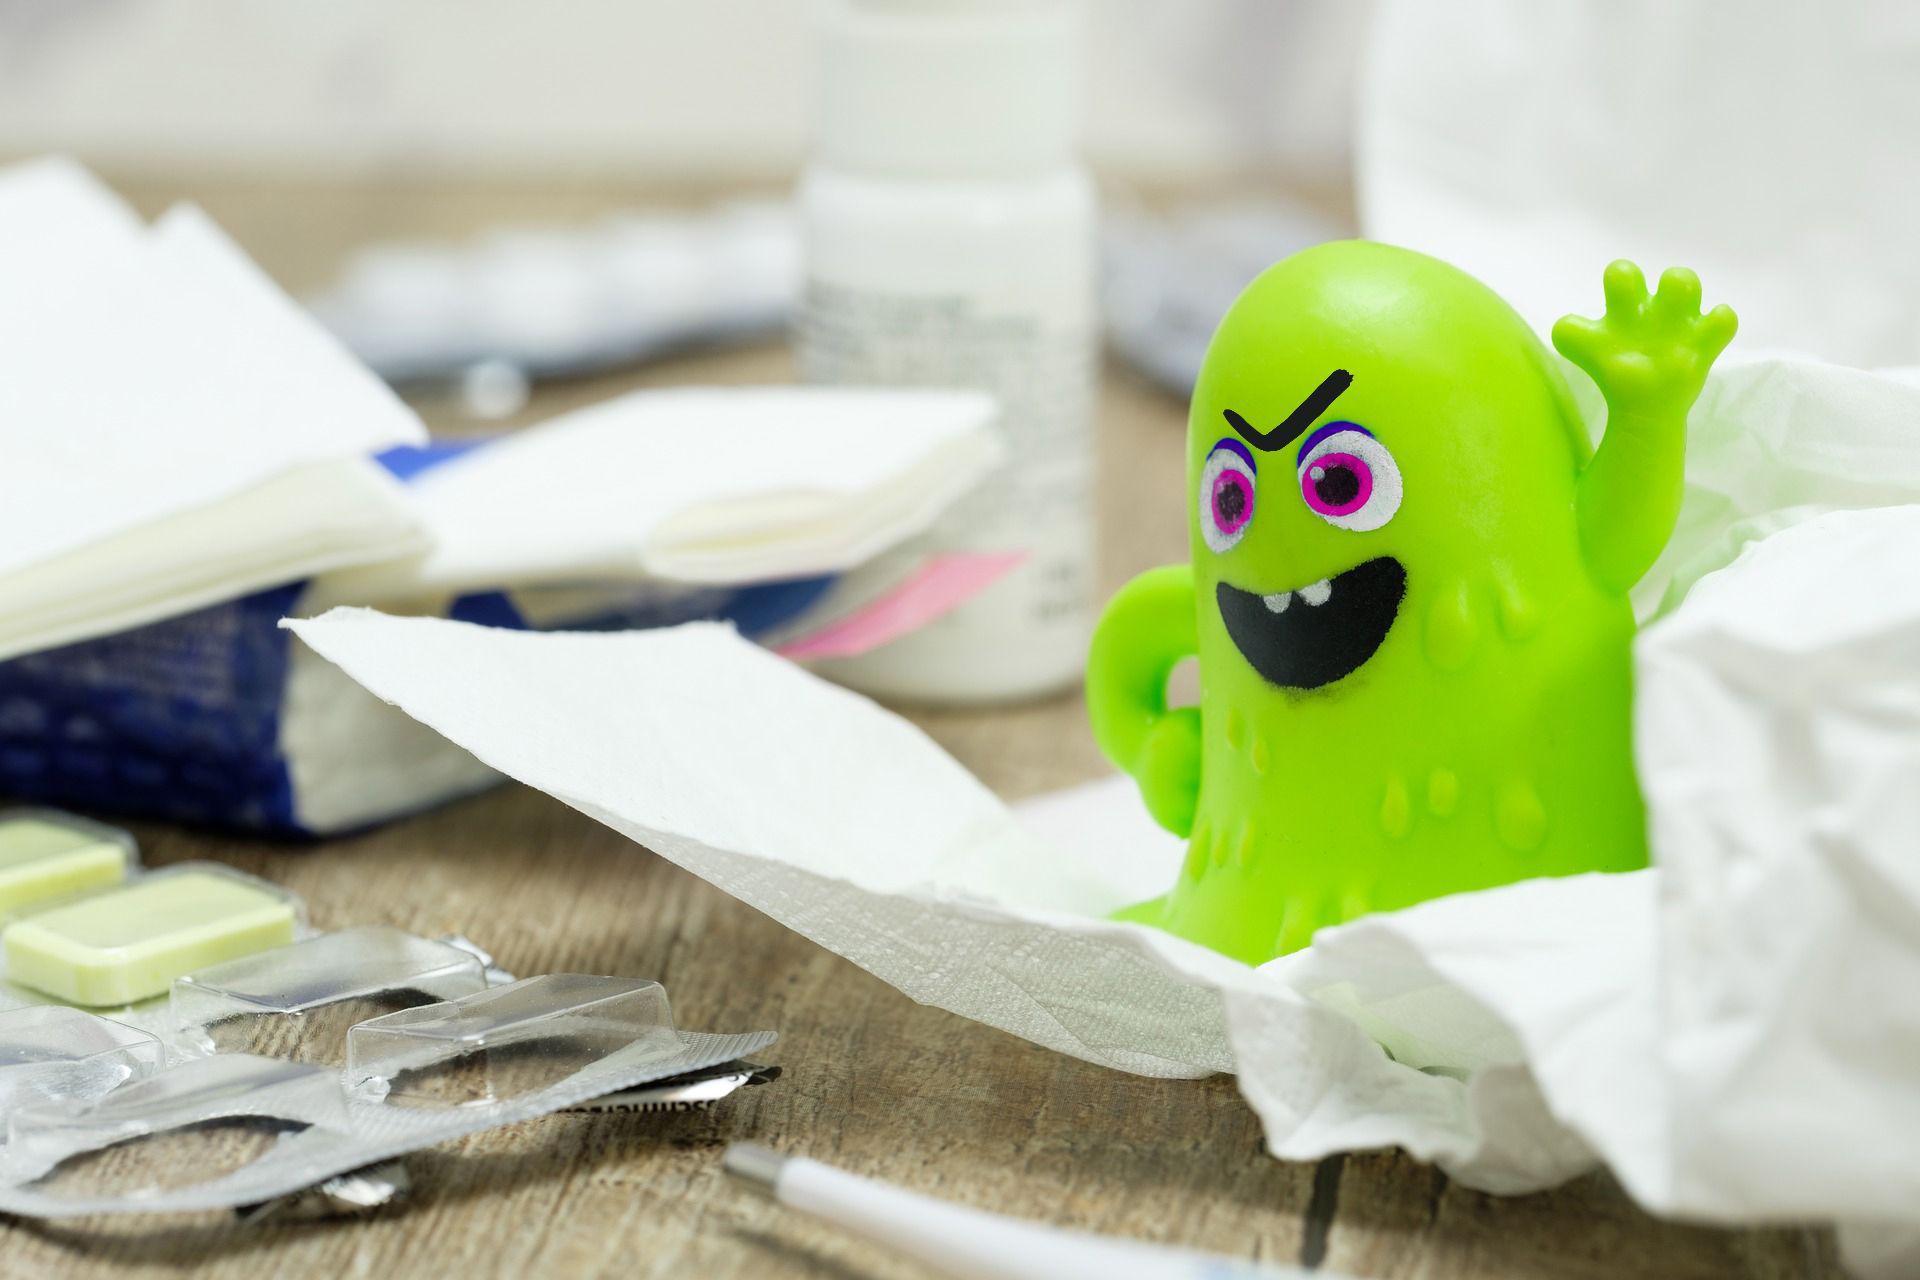 Germ toy on a table